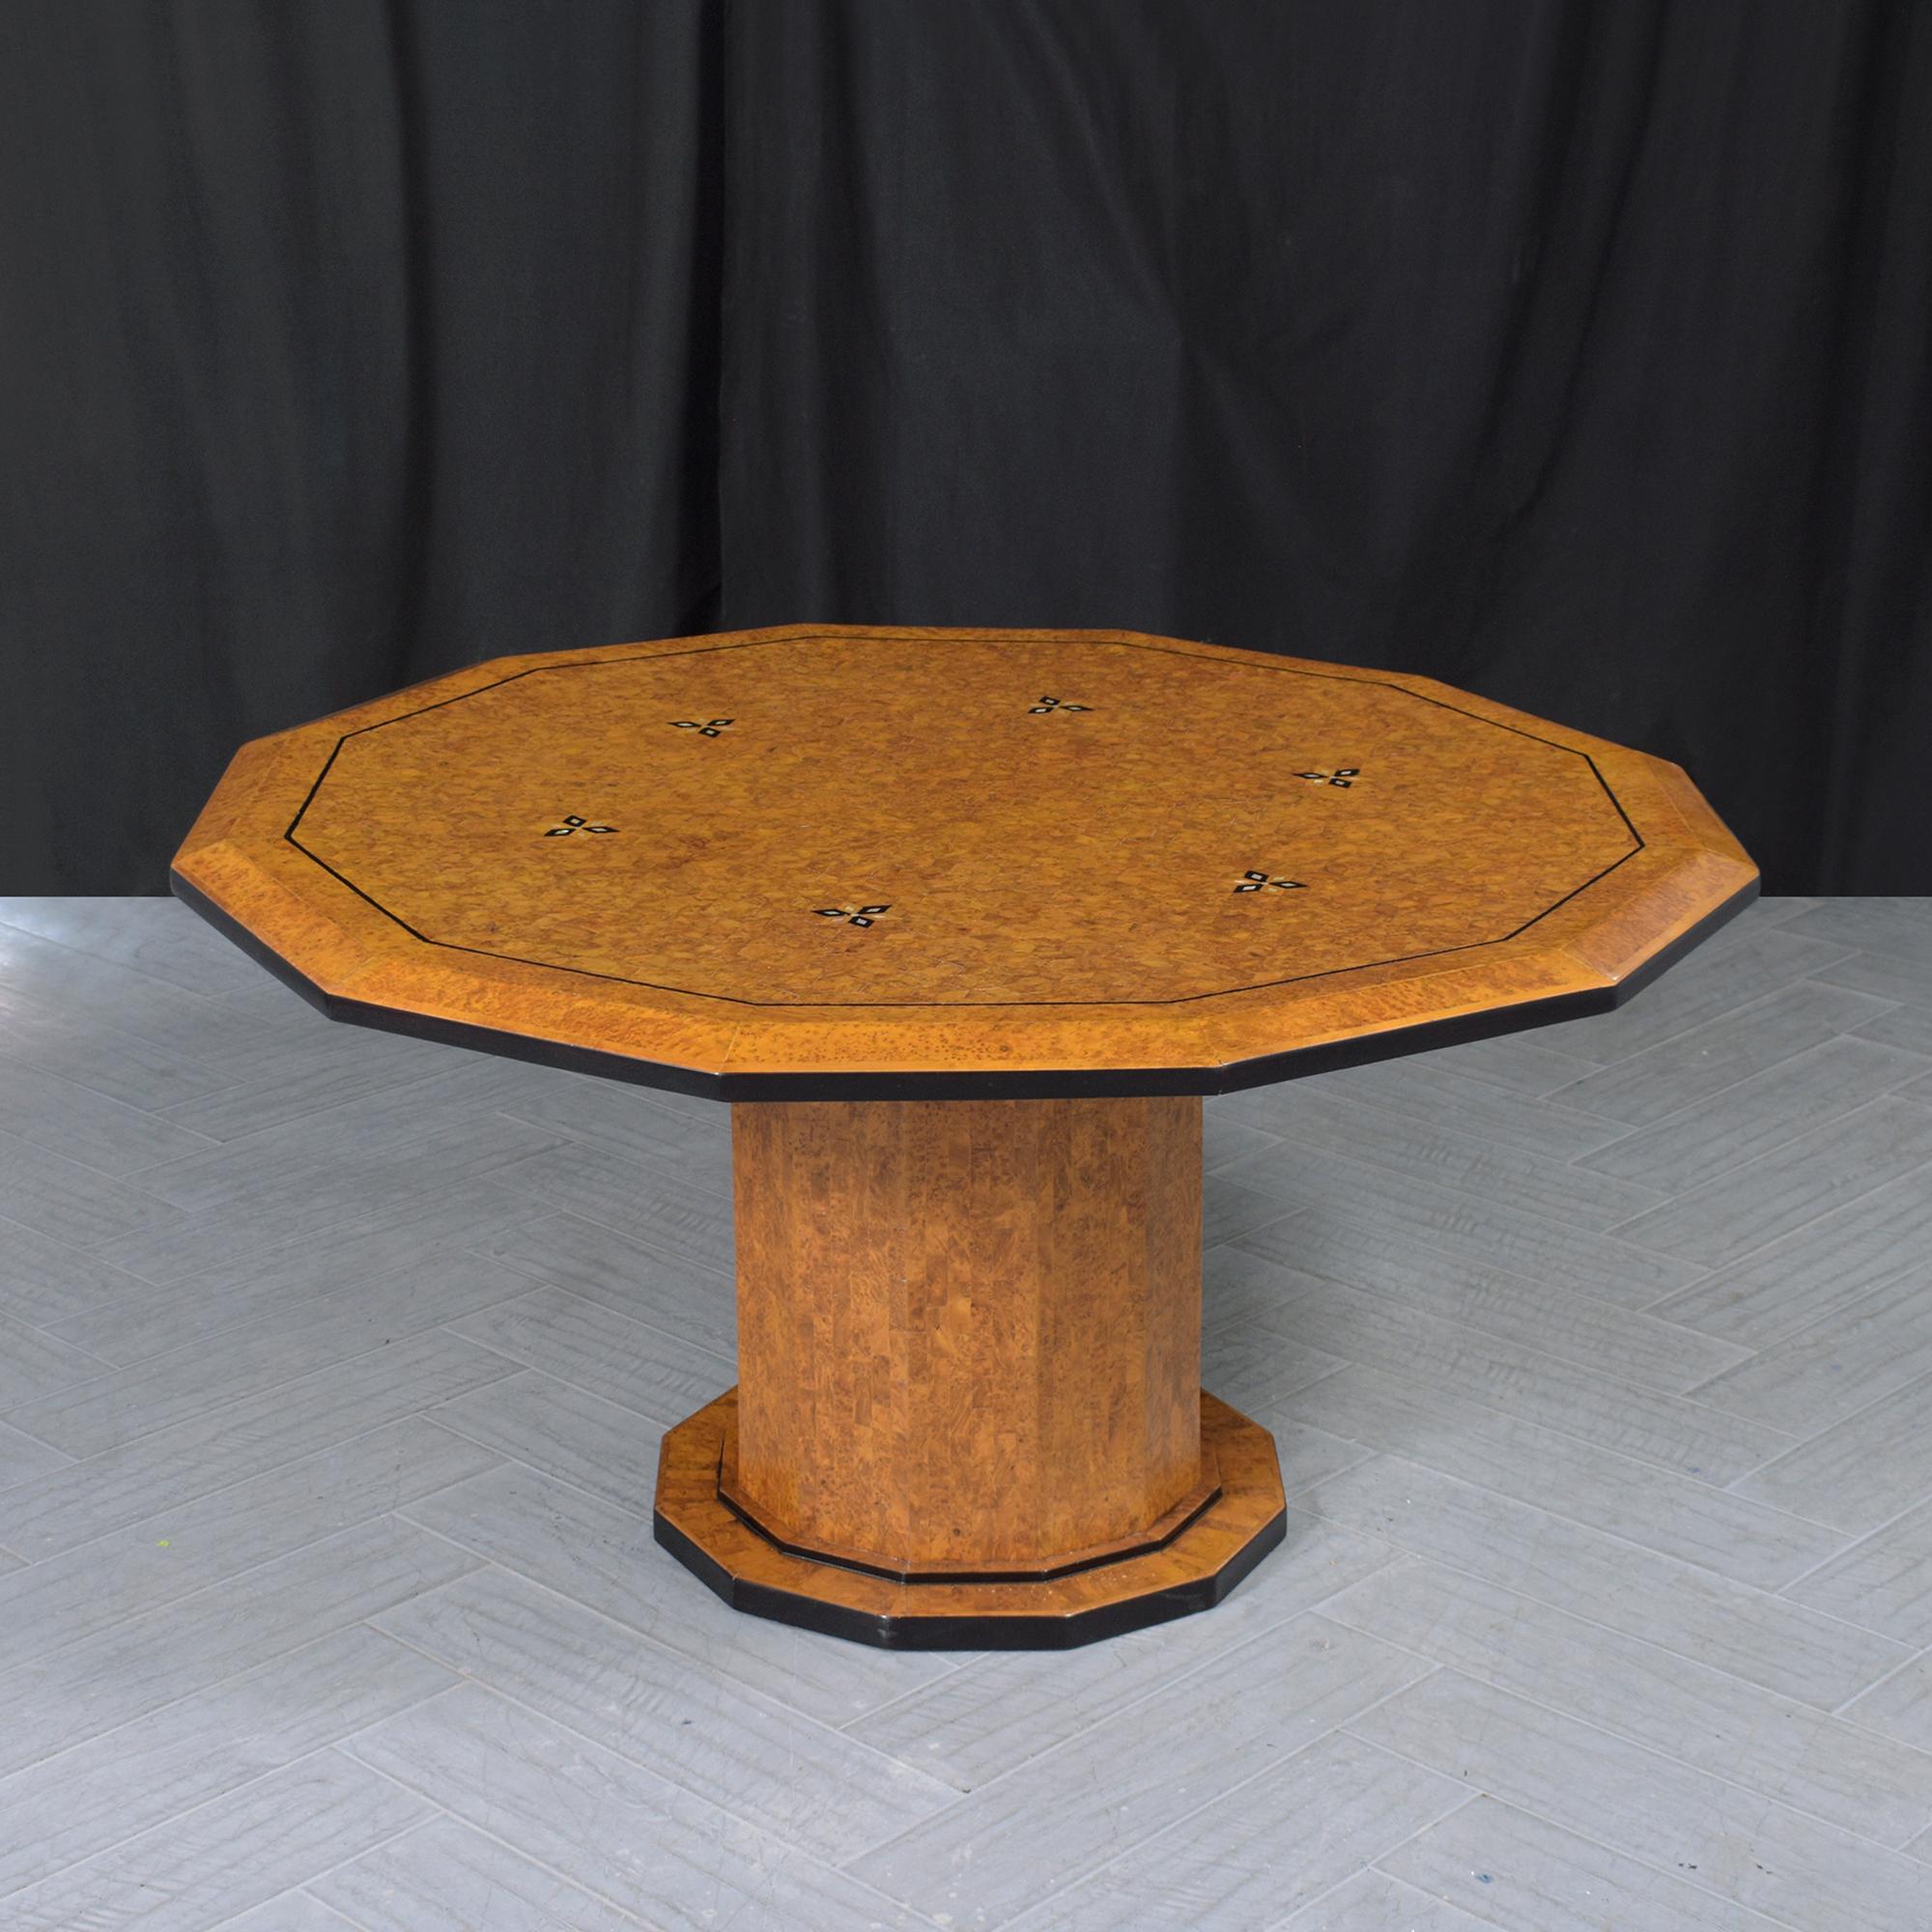 Baroque 1880s Antique Walnut Center Table with Dodecagon Top and Mother-of-Pearl Inlays For Sale